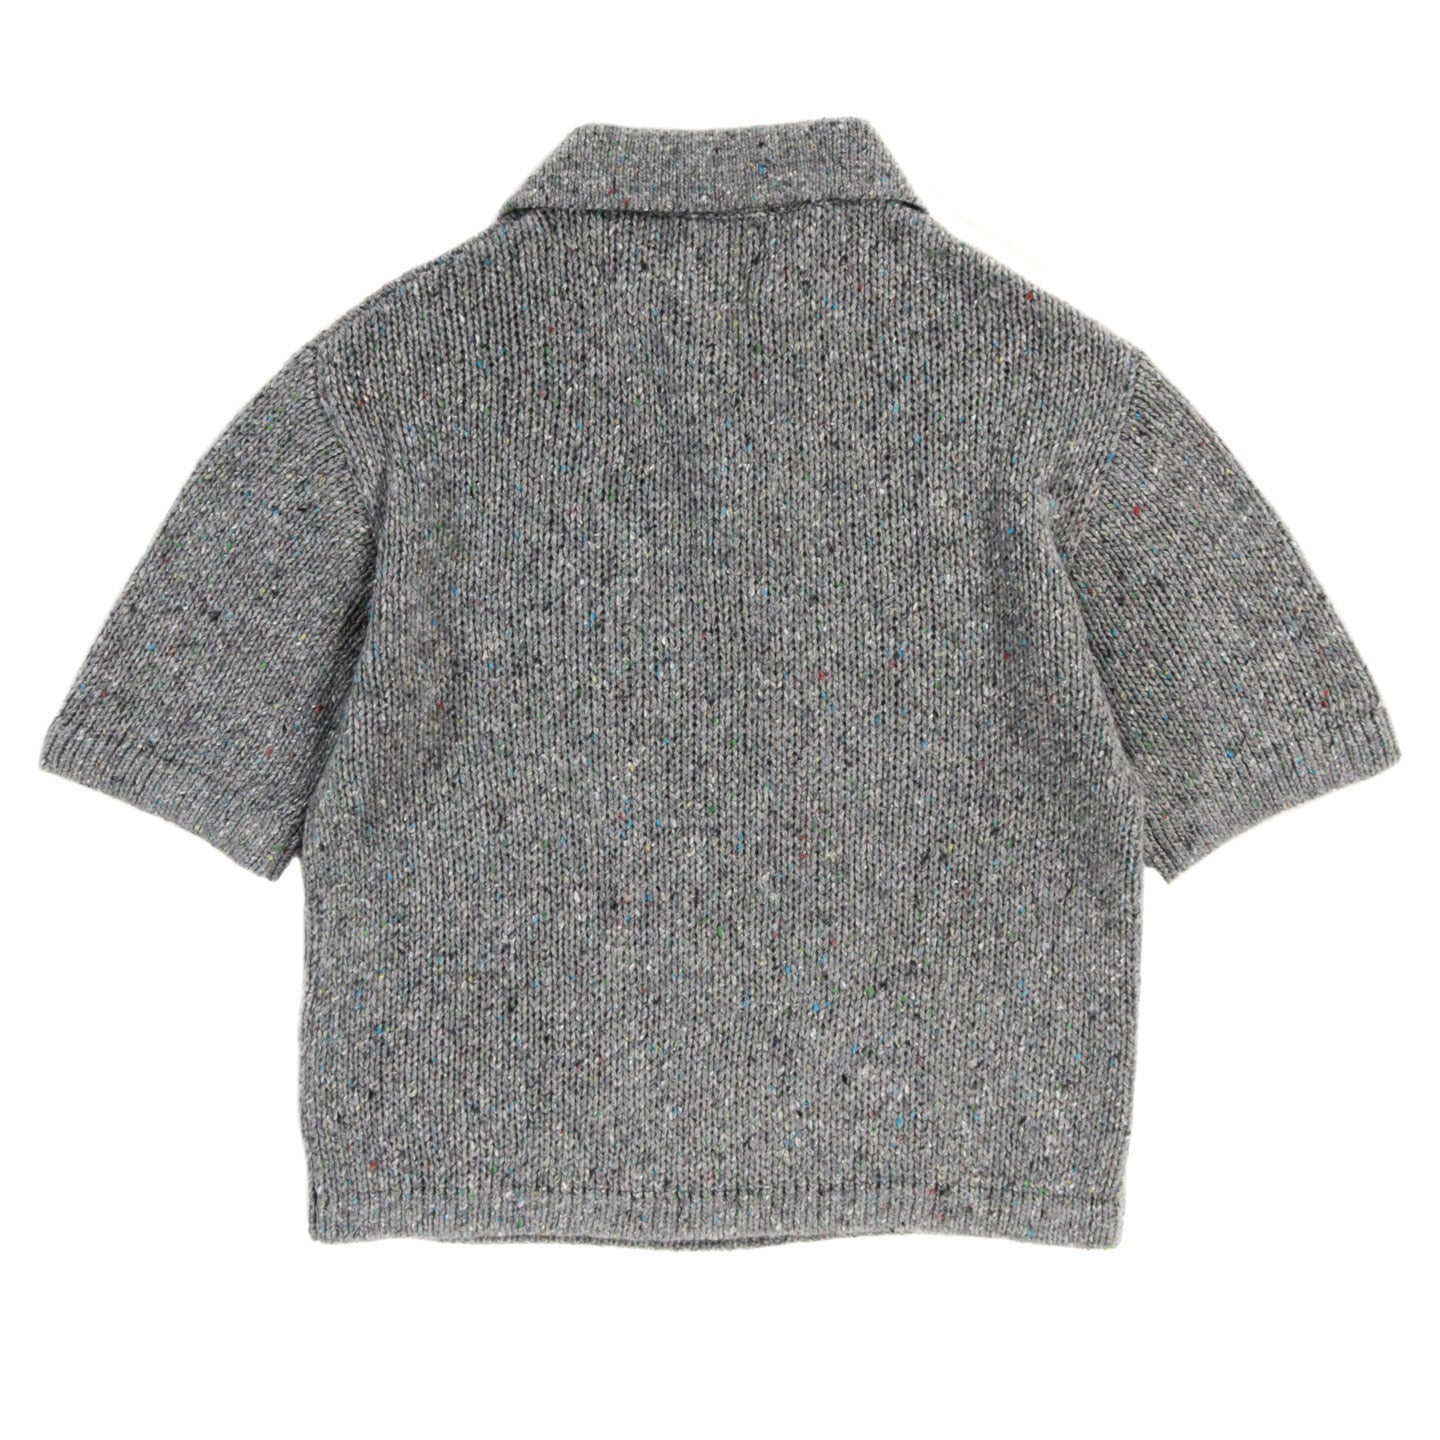 ERL KNIT POLOSHIRT WITH LOGO EMBROIDERY GREY MELANGE